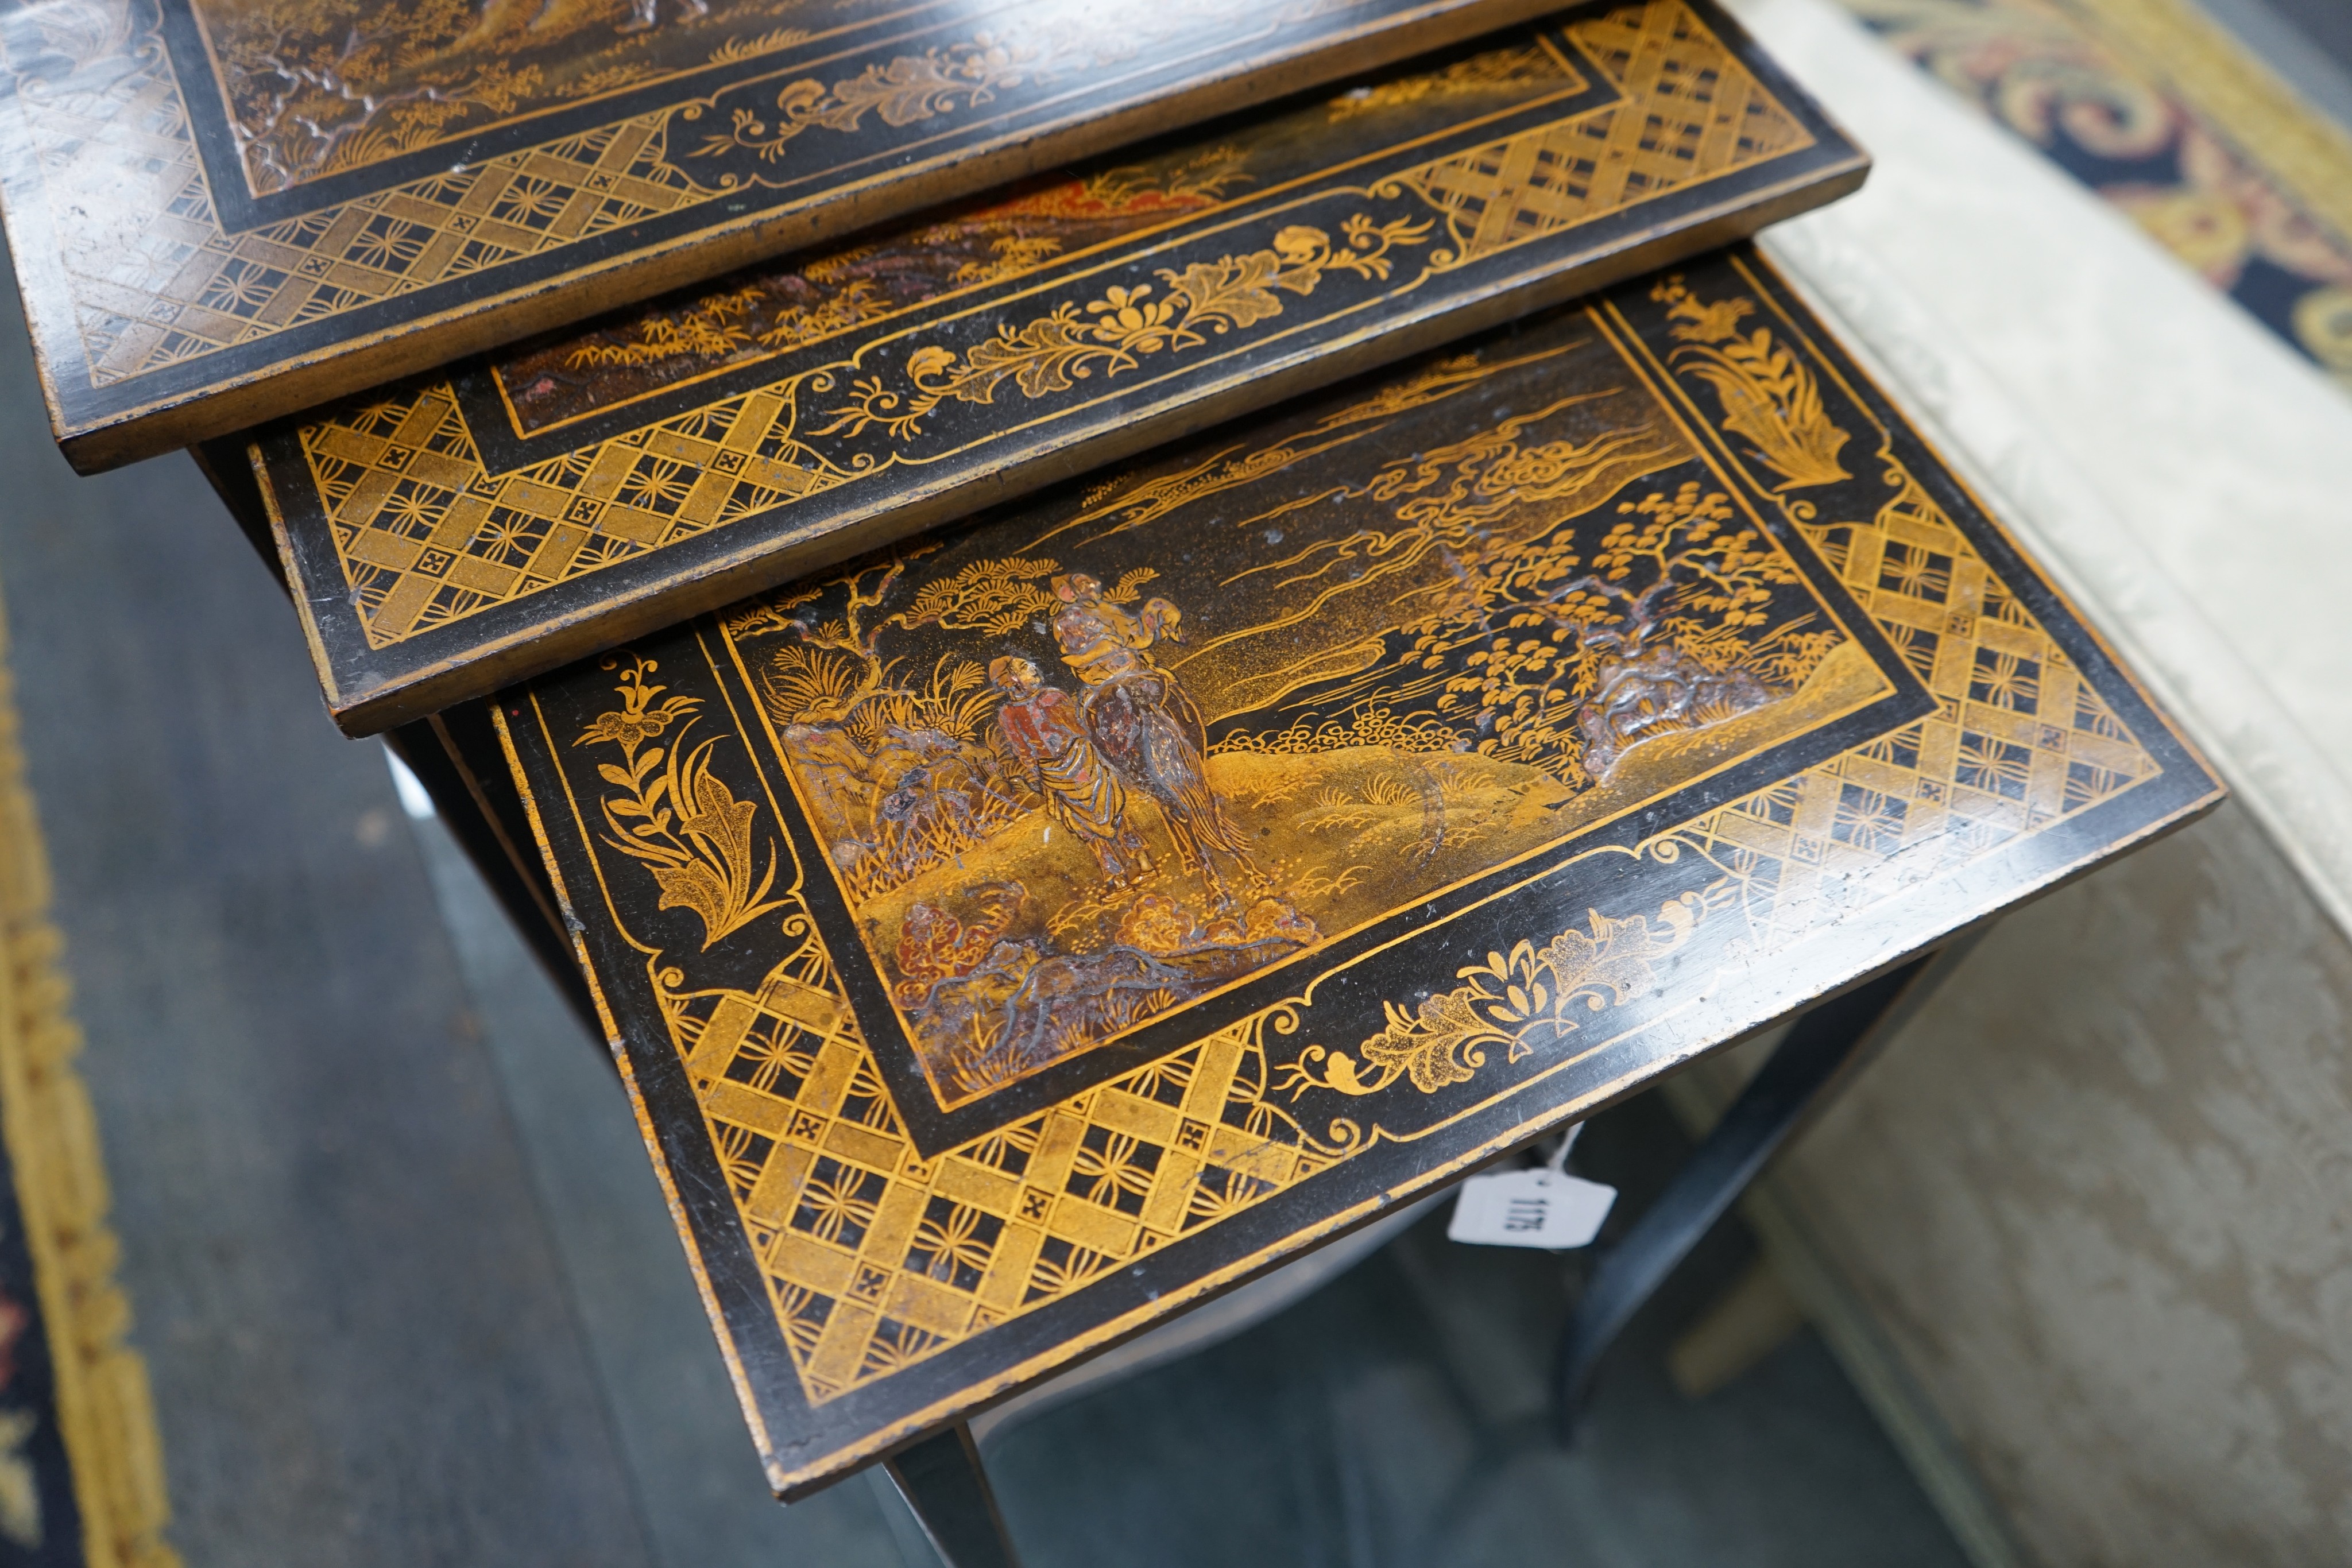 A graduating nest of three rectangular chinoiserie lacquer tea tables, width 46cm, depth 33cm, height 67cm